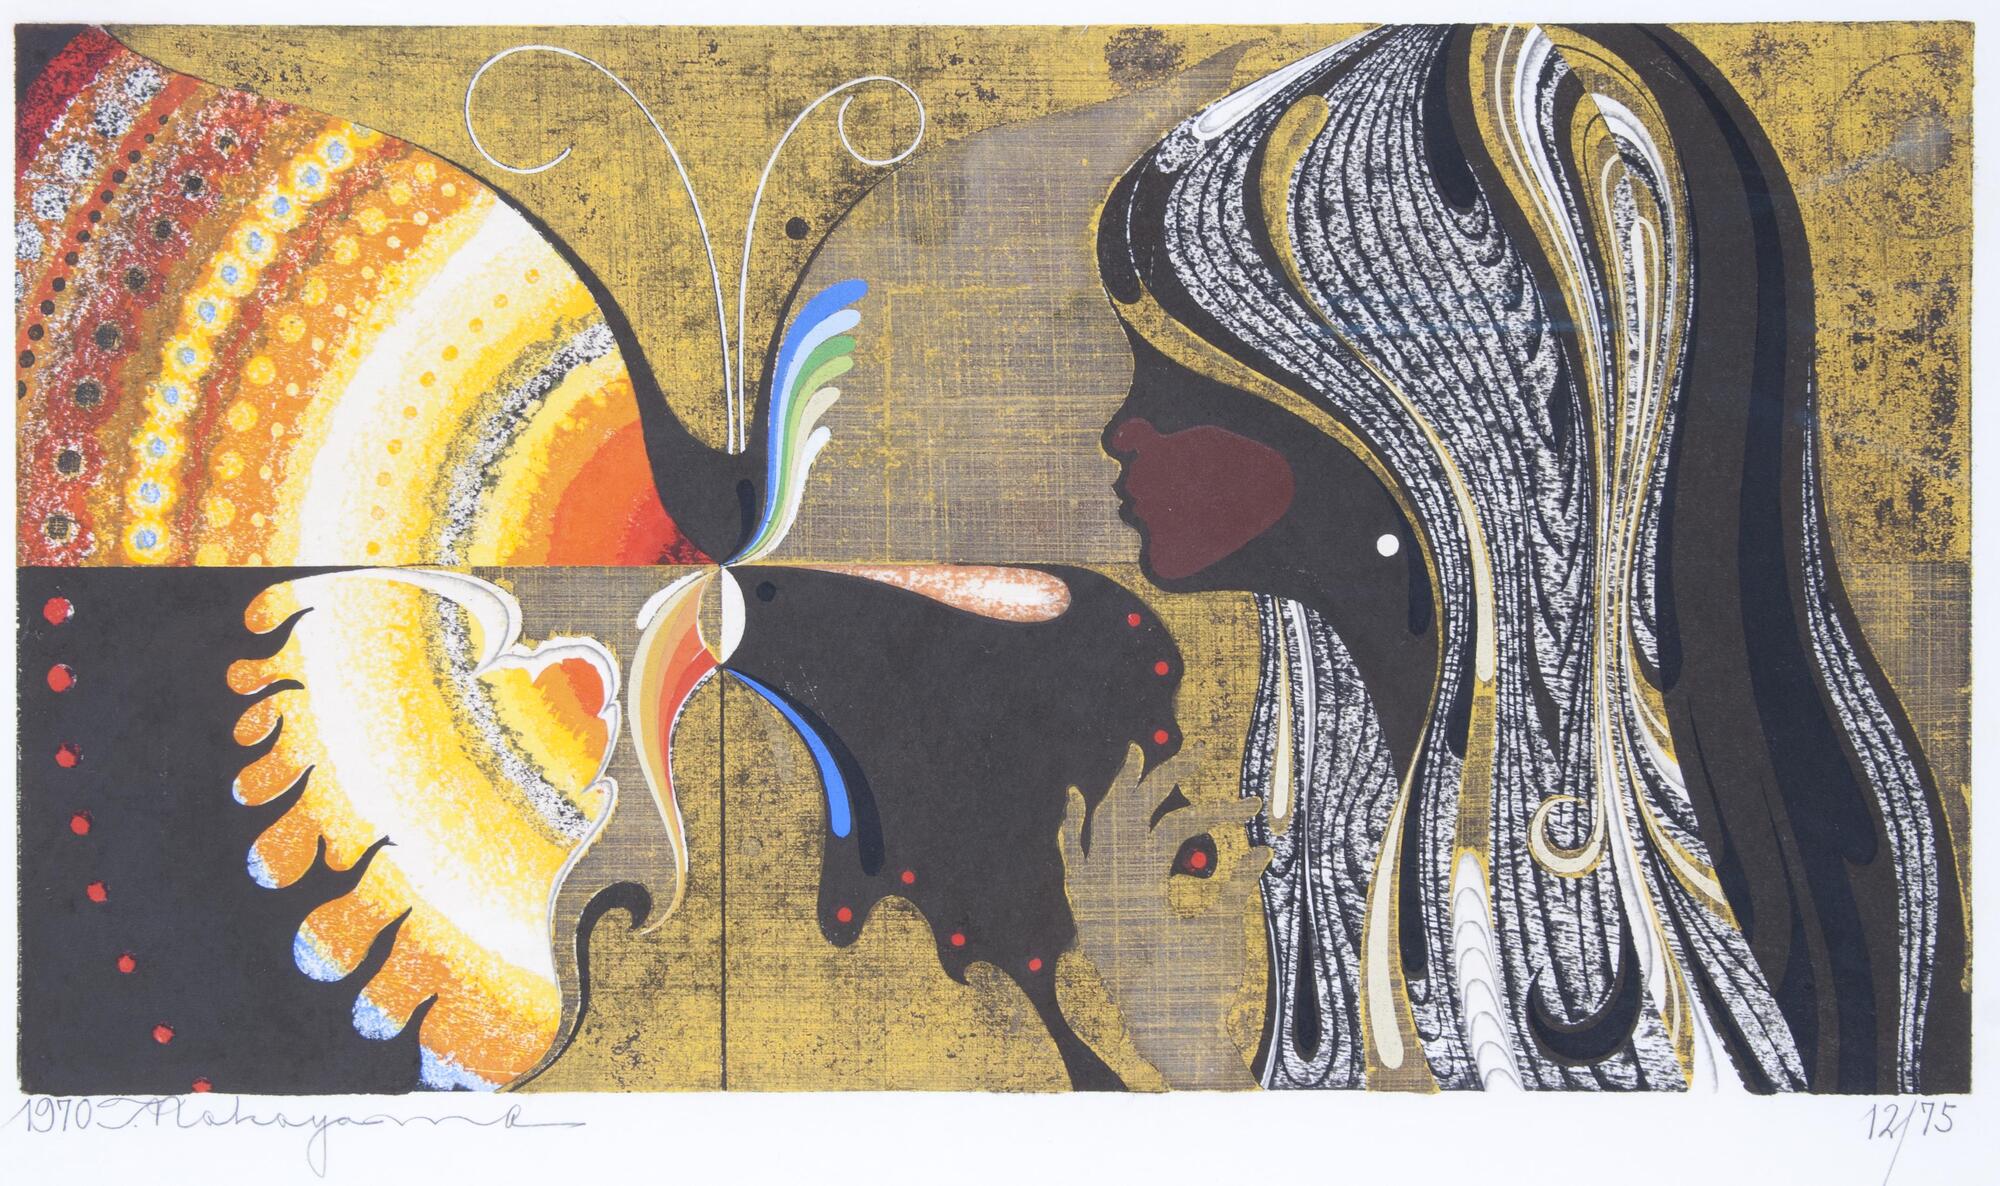 A girl with her head in profile, her black hair is highlighted with white and gold strands. Her hand is held in front of her. Next to her is a large brown, tan, red, and yellow butterfly with abstract design on its wings.